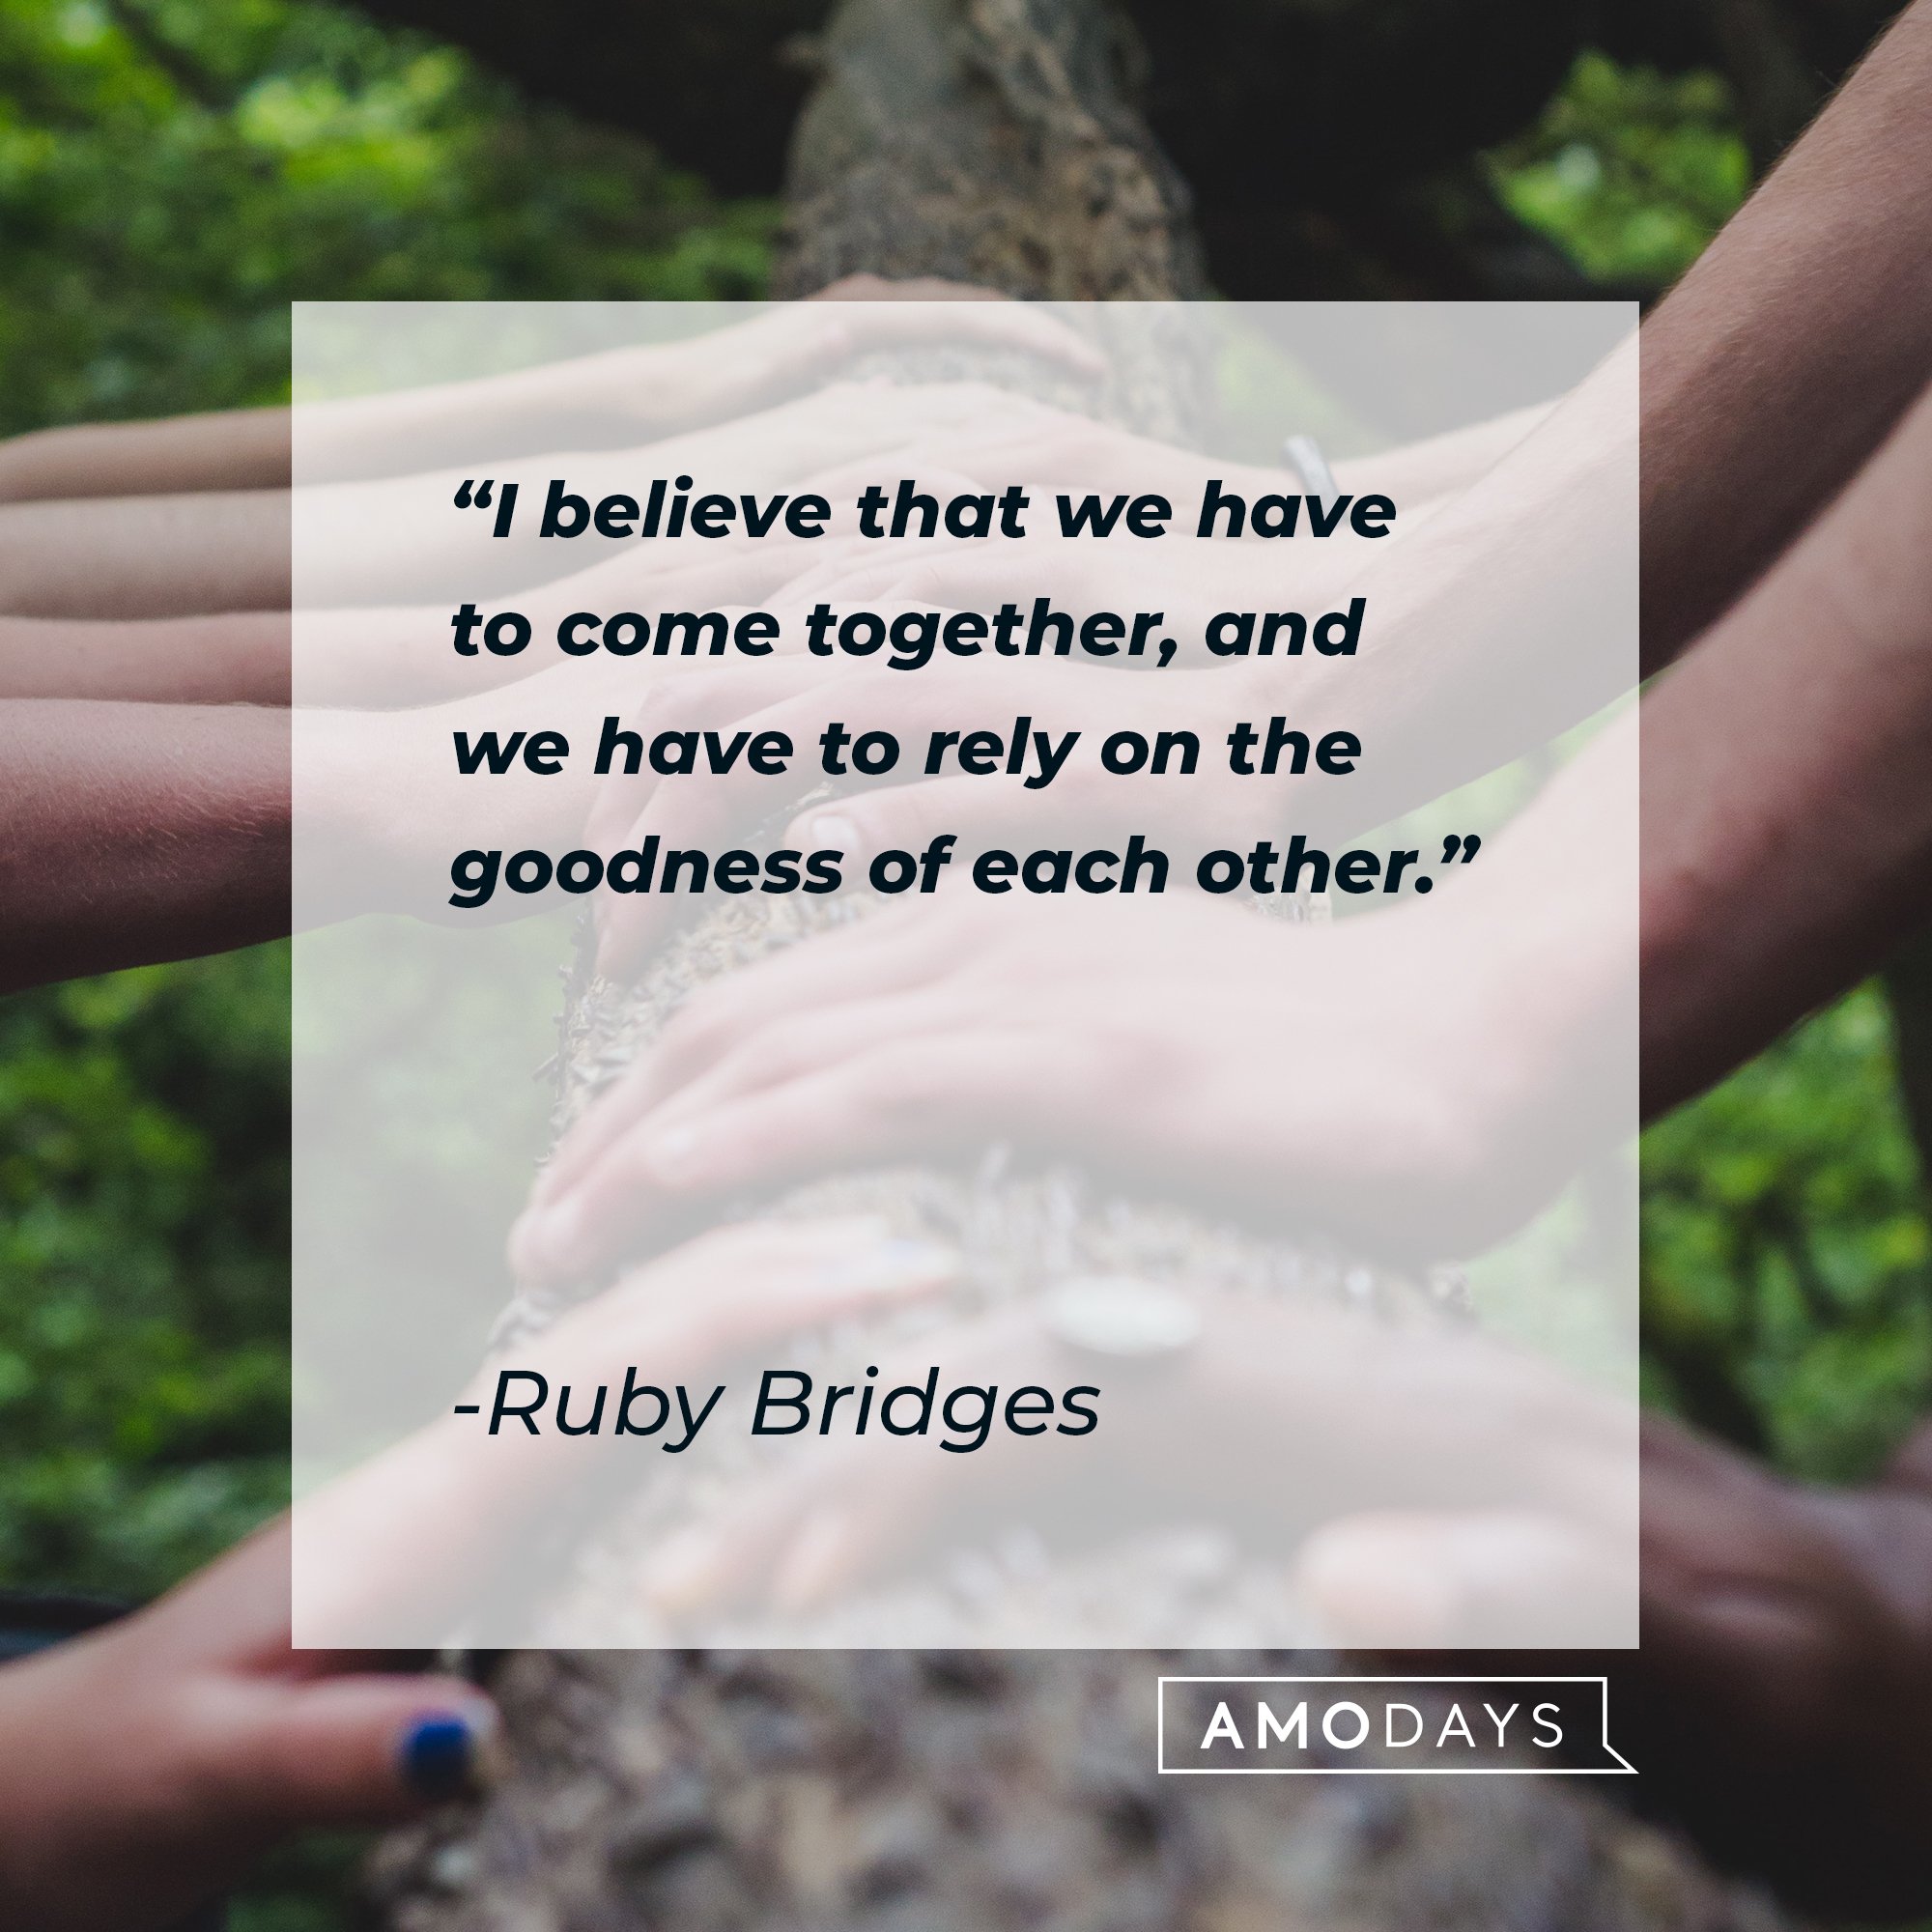 Ruby Bridges’ quote: "I believe that we have to come together, and we have to rely on the goodness of each other.” | Image: AmoDays 